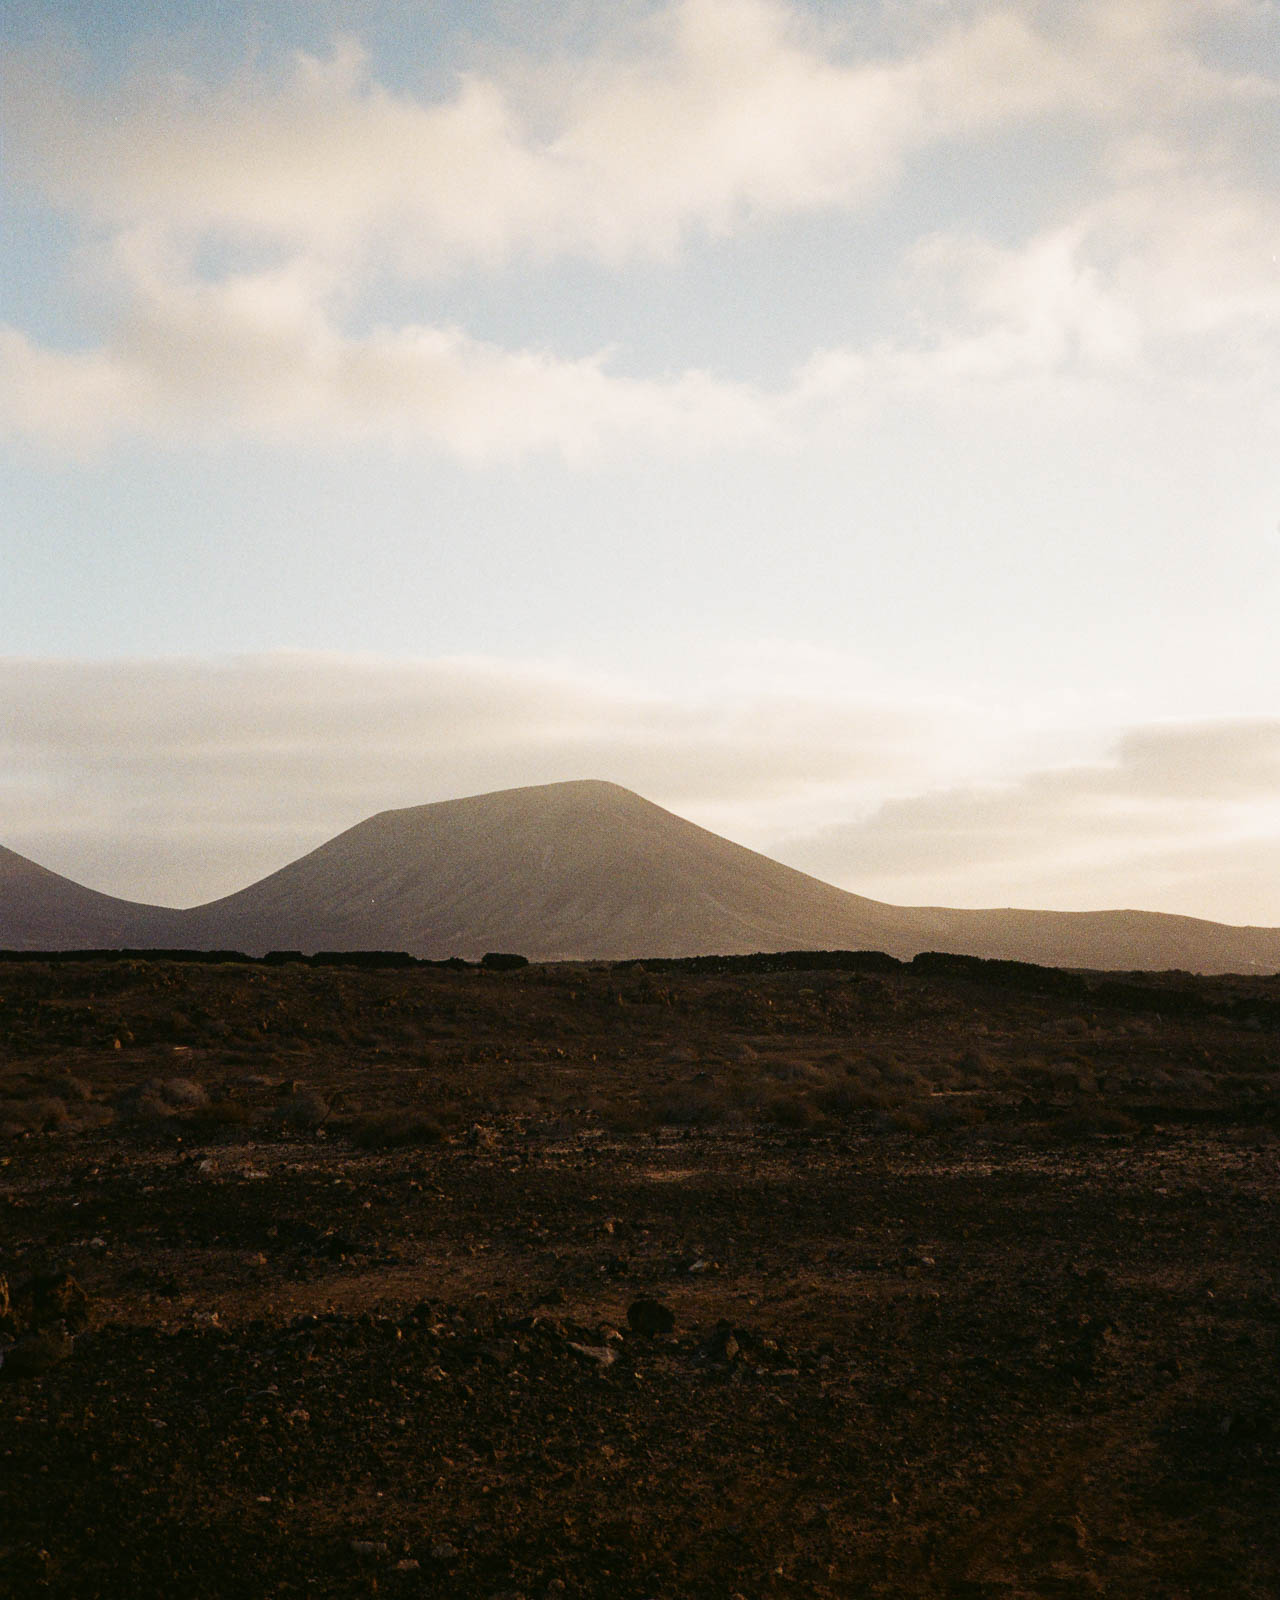  analog diary 2020 by storm wes shot with yasica t4 on Kodak gold film in Lanzarote